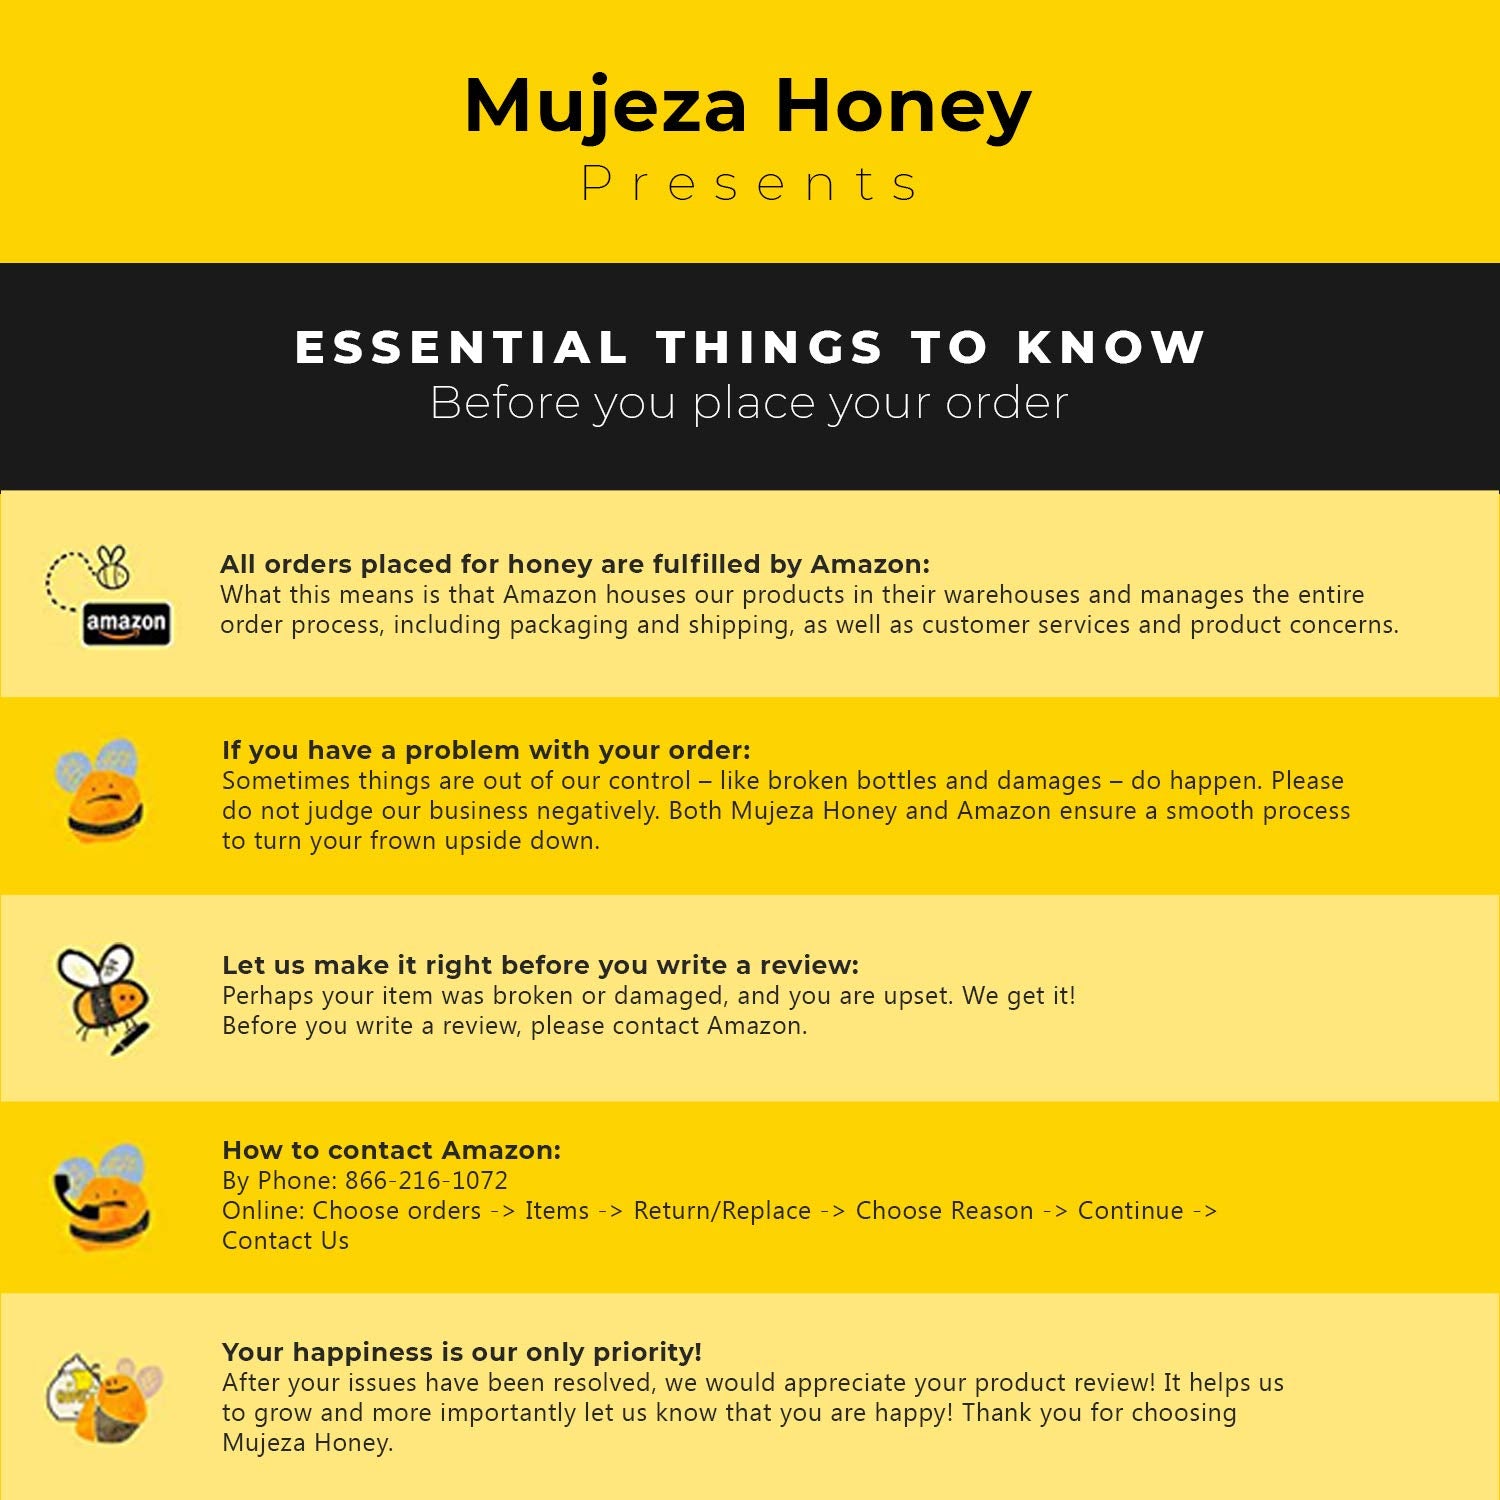 Mujeza Honey  - The essential things to know before you place your order 